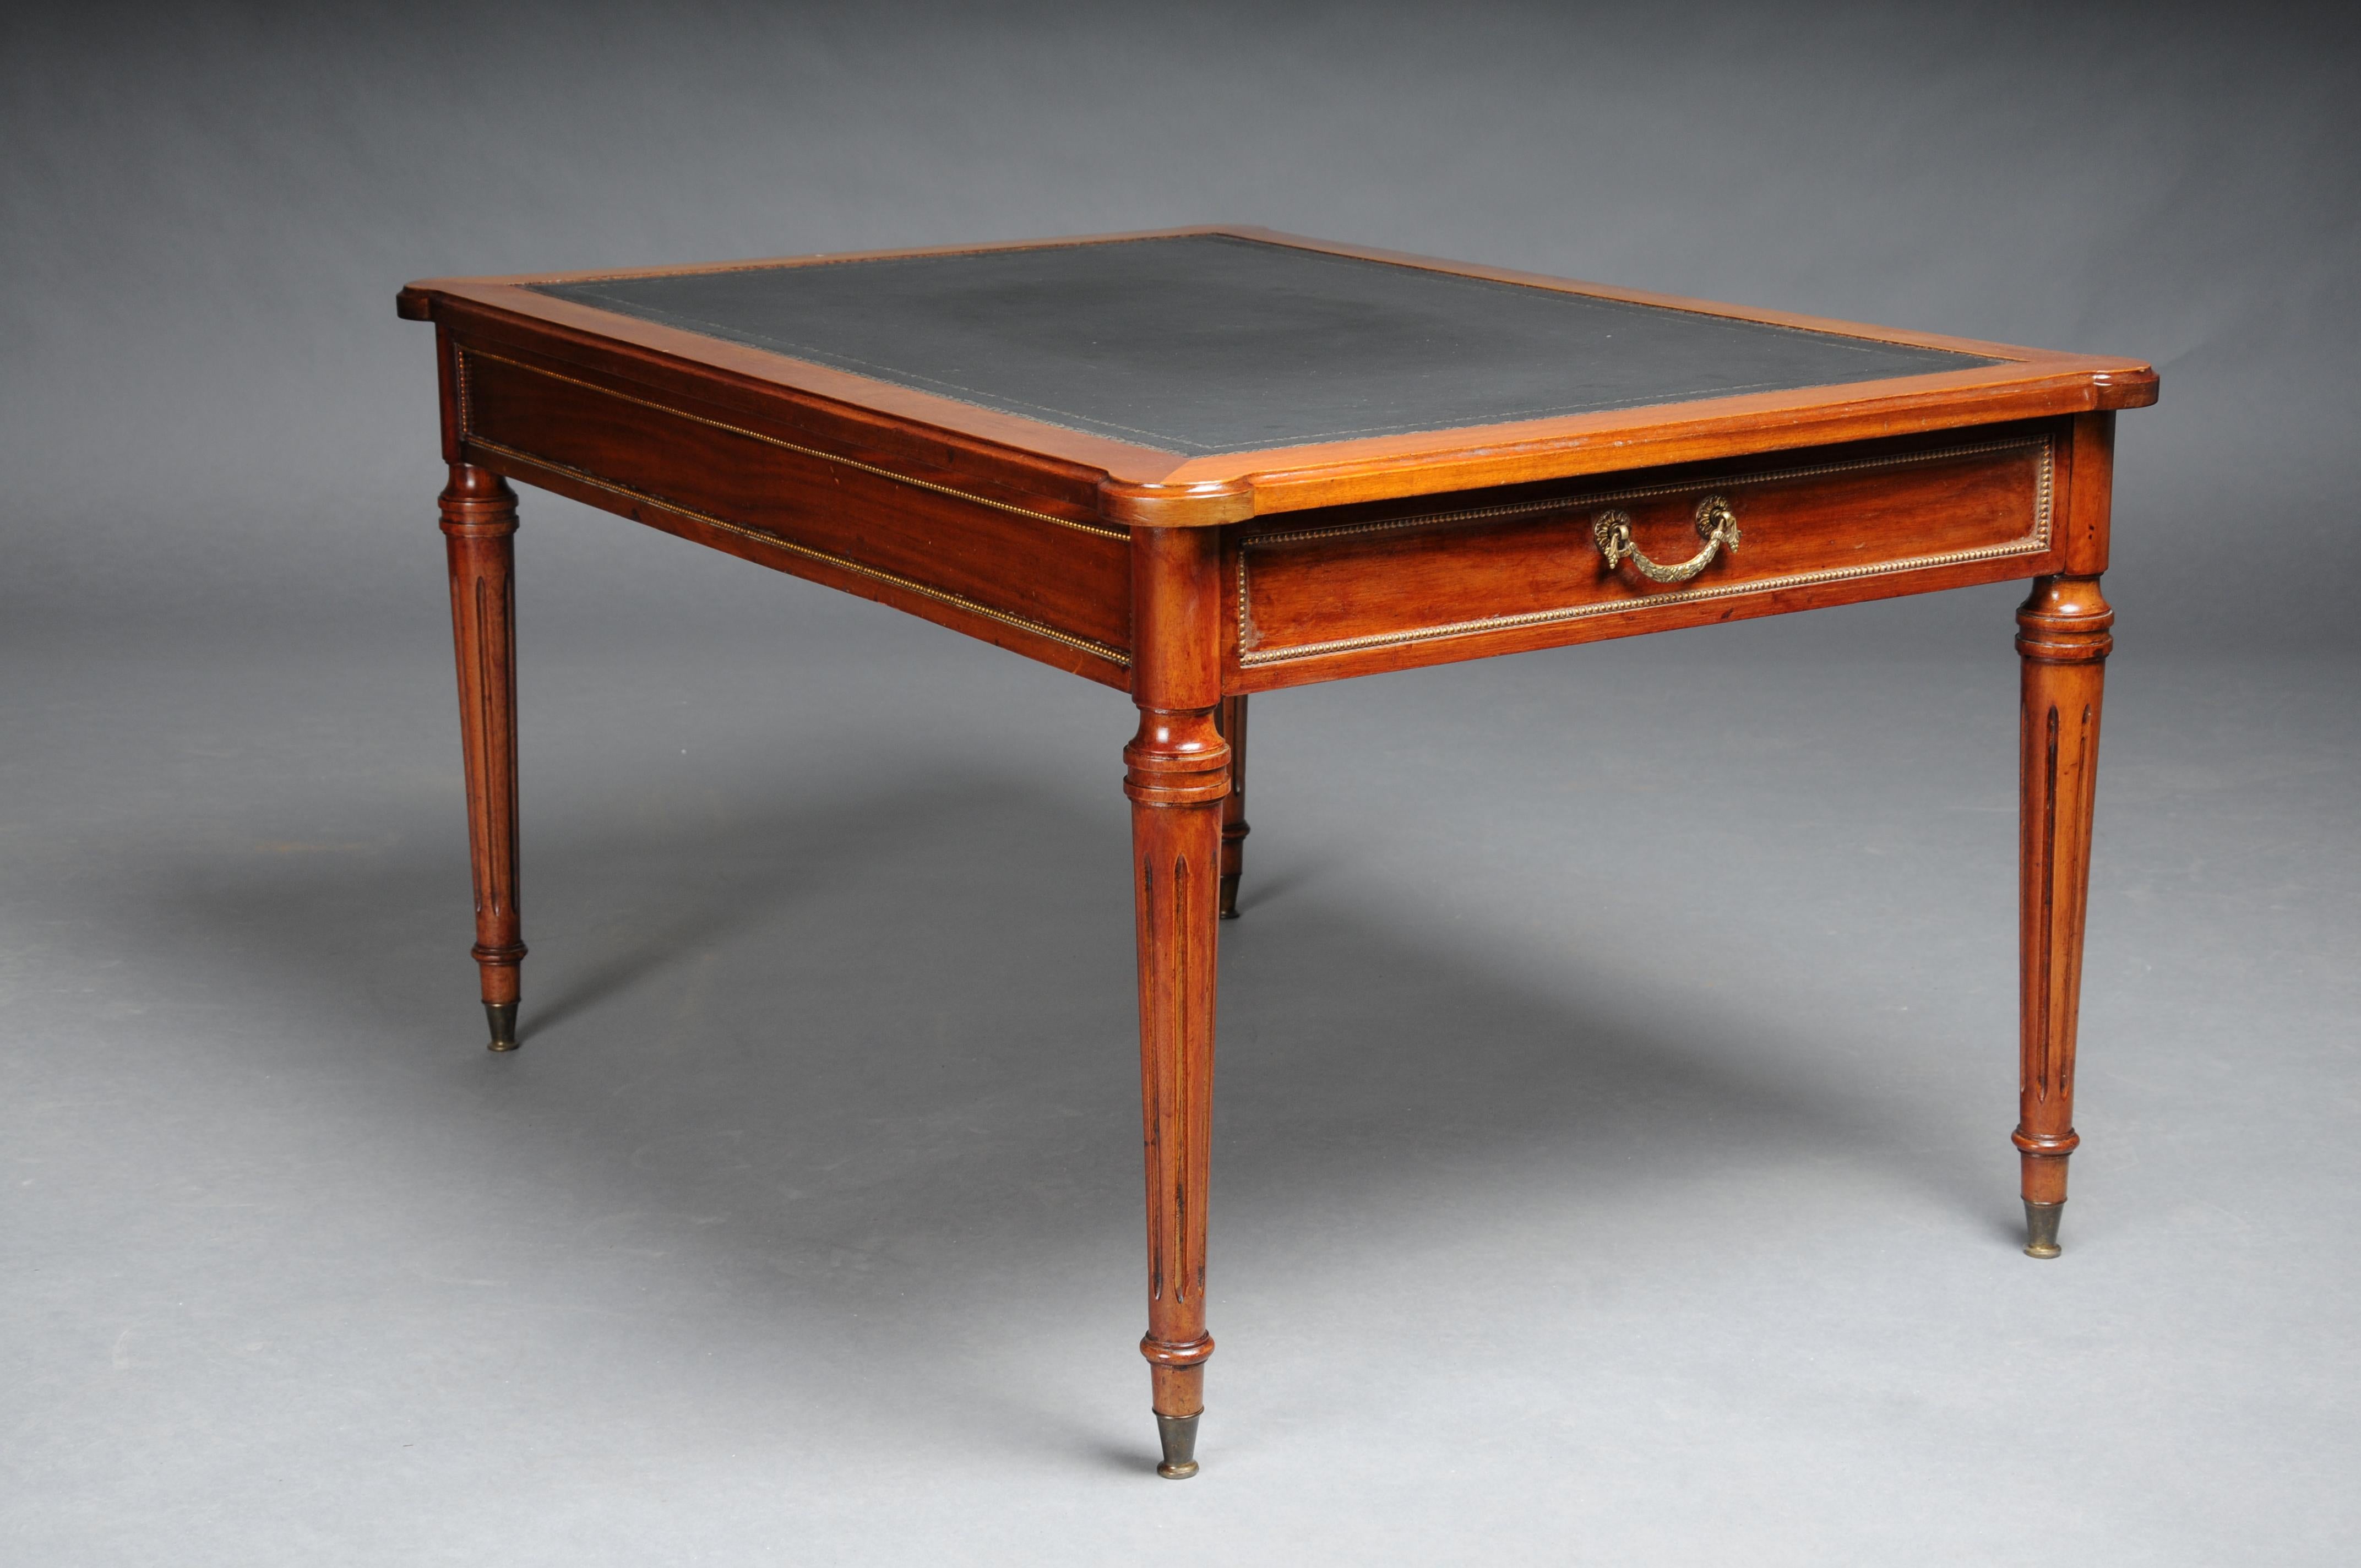 20th century Classicist English coffee table leather top

Body made of moving wood. Partially furnished in mahogany. On tapered and fluted areas.
Covered with black leather. Bronze fittings. both sides with drawers.

An absolutely adorable and